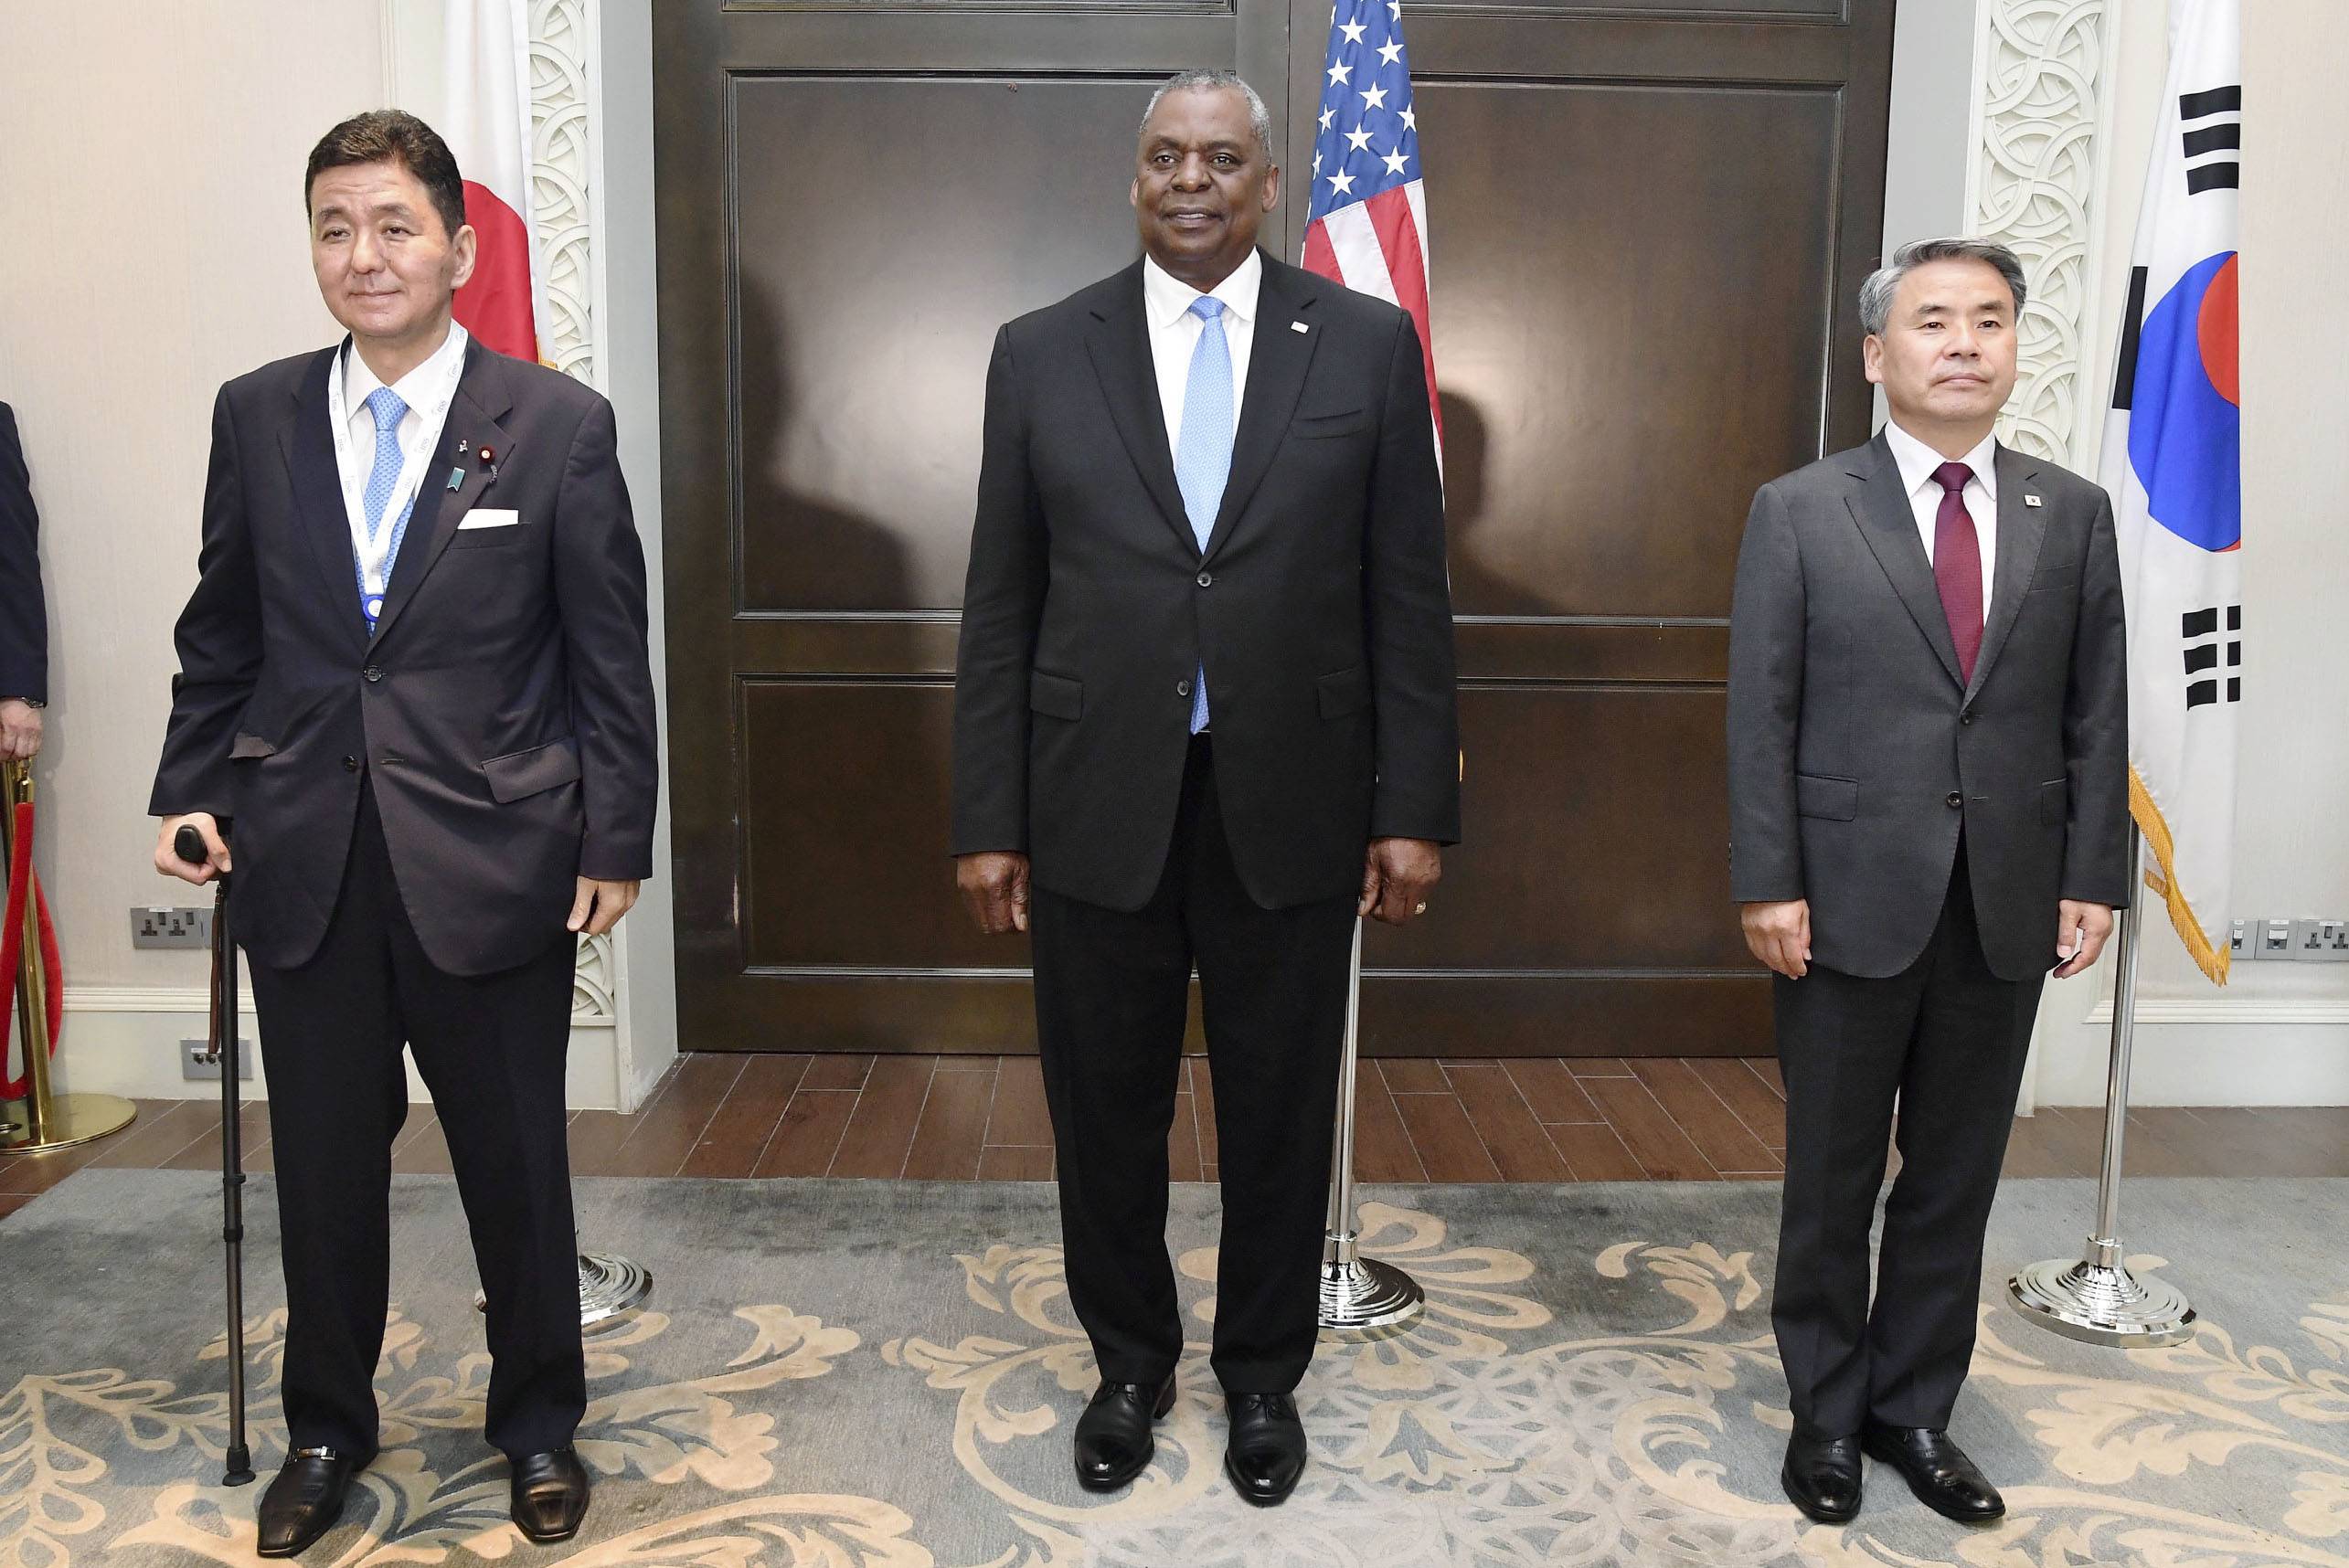 Japanese Defense Minister Nobuo Kishi, U.S. Defense Secretary Lloyd Austin and South Korean Defense Minister Lee Jong-sup pose for a picture during trilateral talks in Singapore on Saturday. | JAPANESE DEFENSE MINISTRY / VIA KYODO